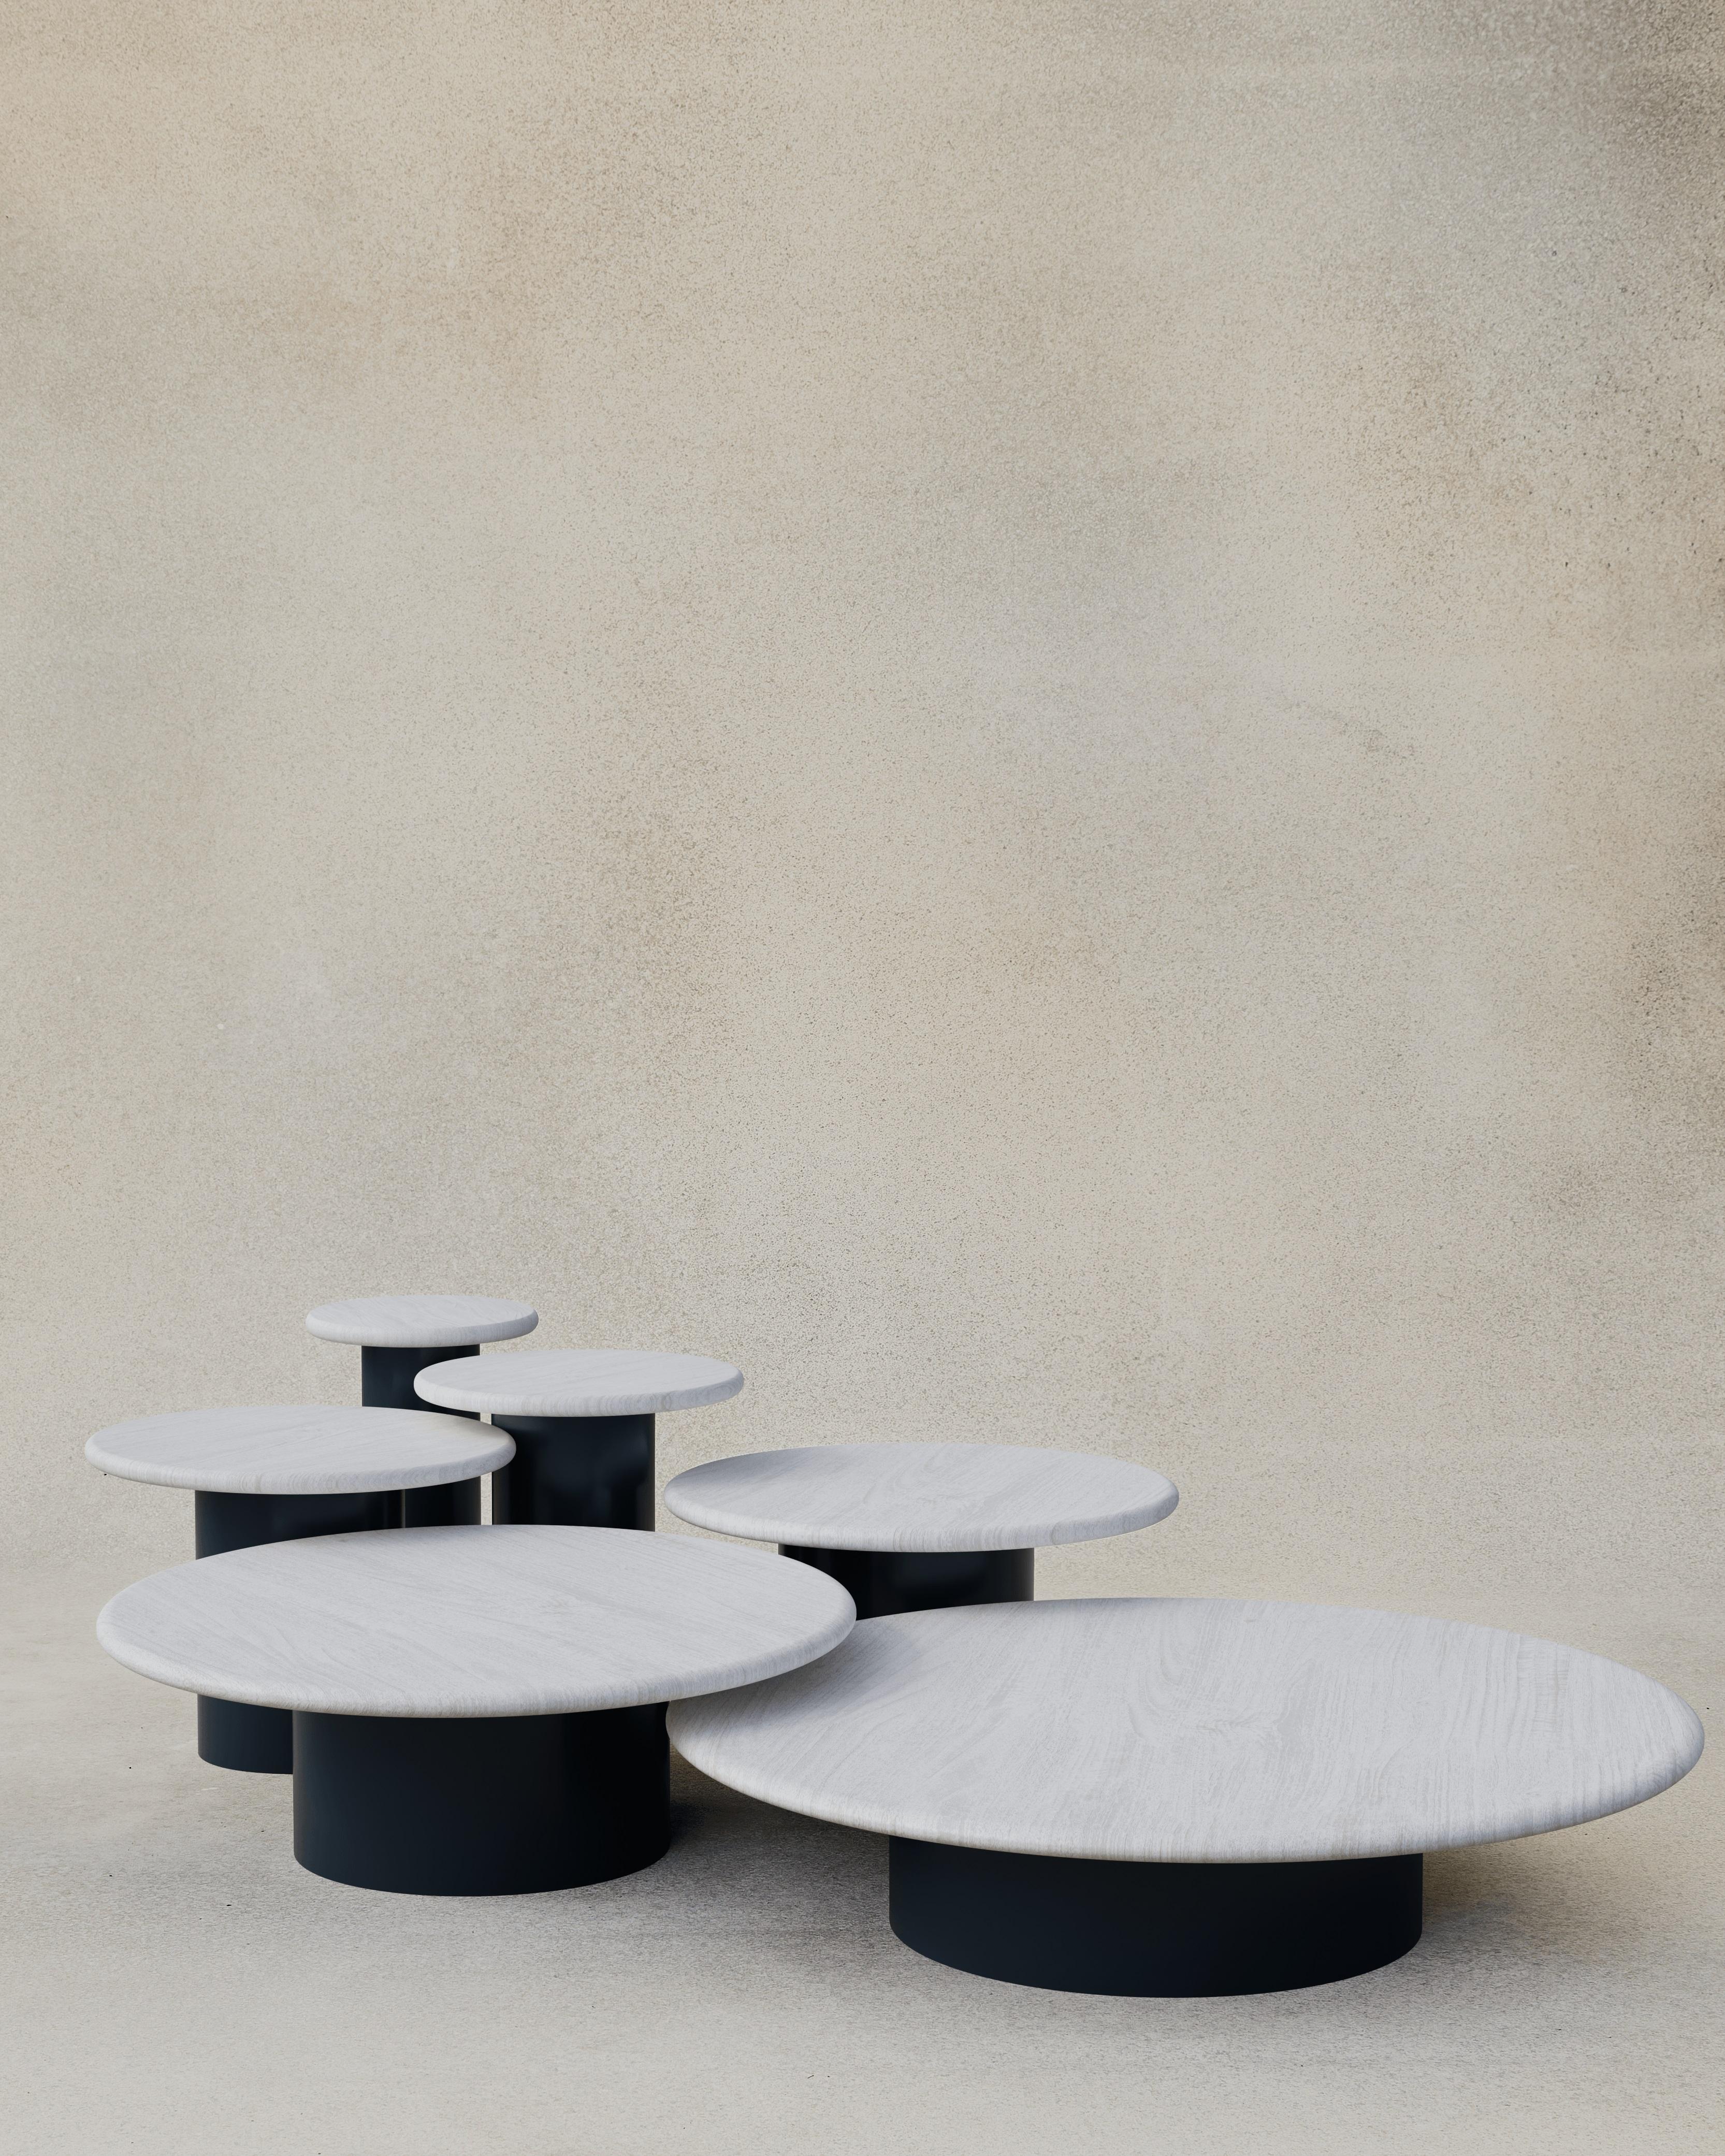 With their circular profiles, varying proportions and potential to be nested, these versatile tables evoke the pattern of raindrops in a pool of water when placed together.

Bought as a full set of 300, 400, 500, 600, 800 and 1000, we add a 10%